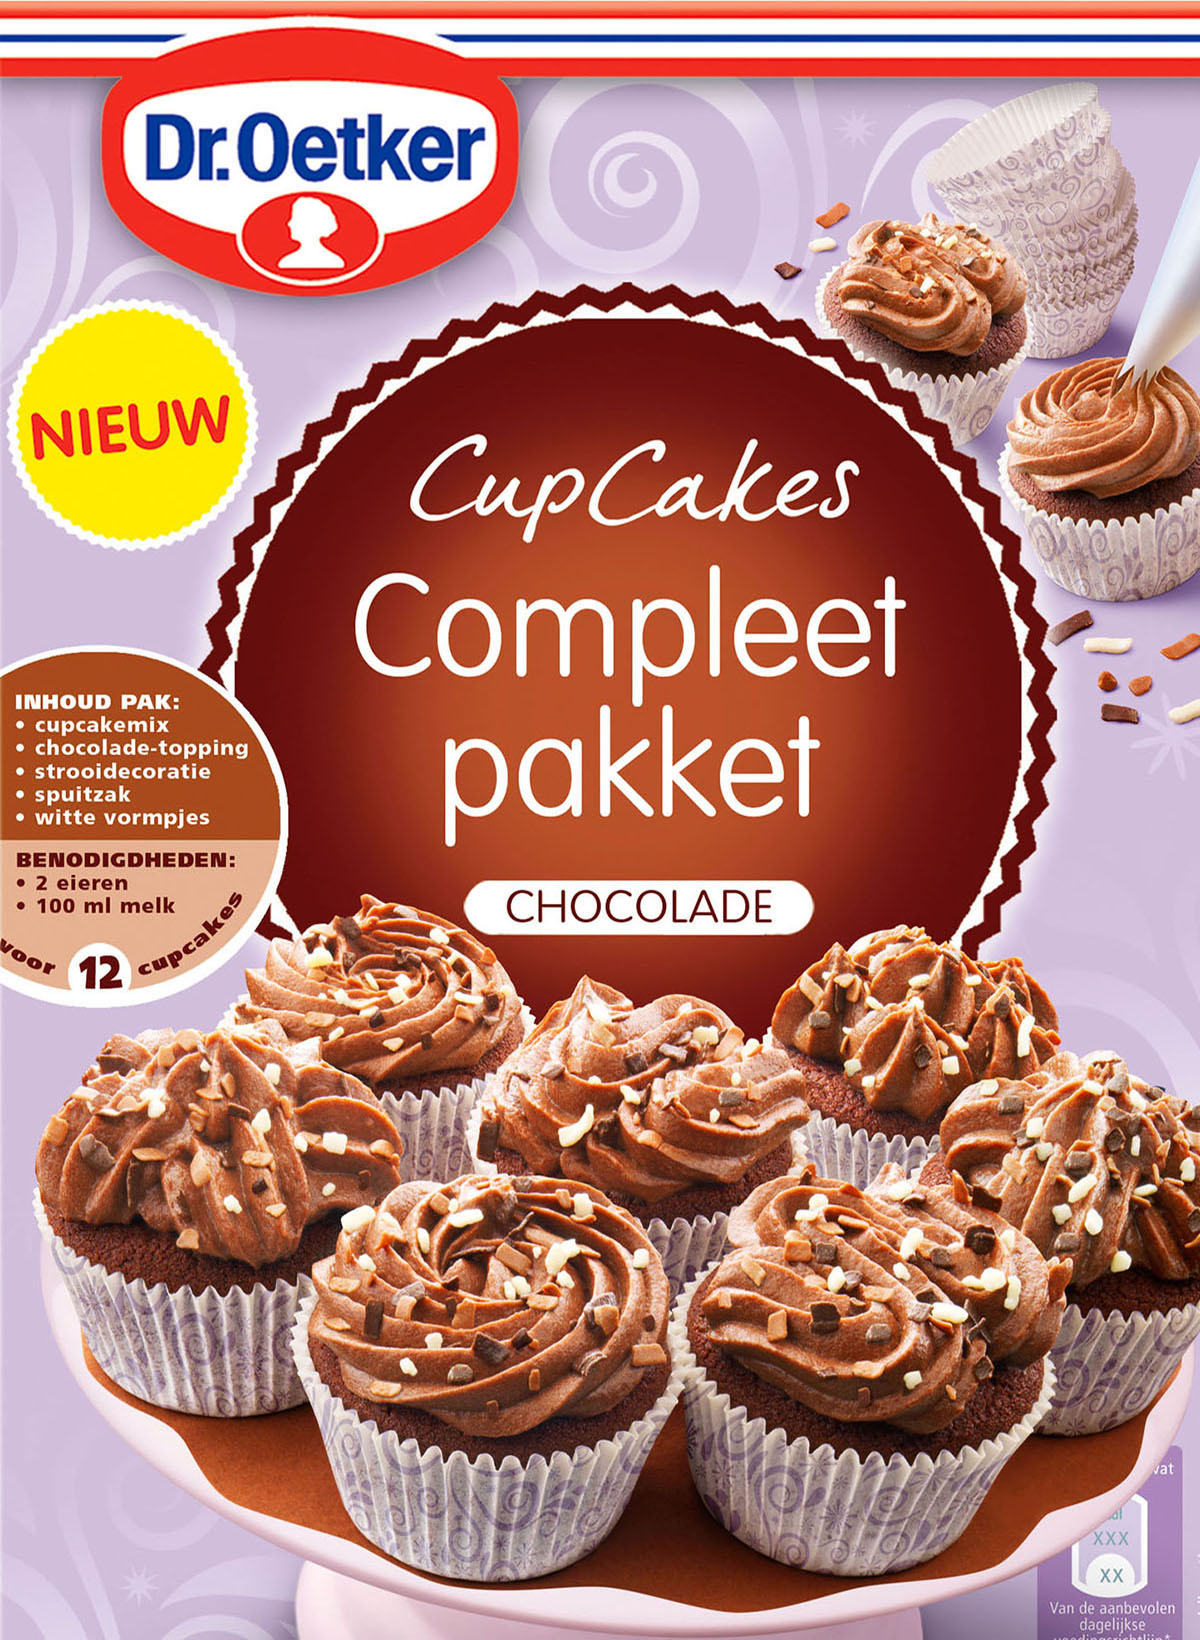 Packaging photography of Dr.Oetker's chocolate cupcakes made by Studio_m Photography Amsterdam